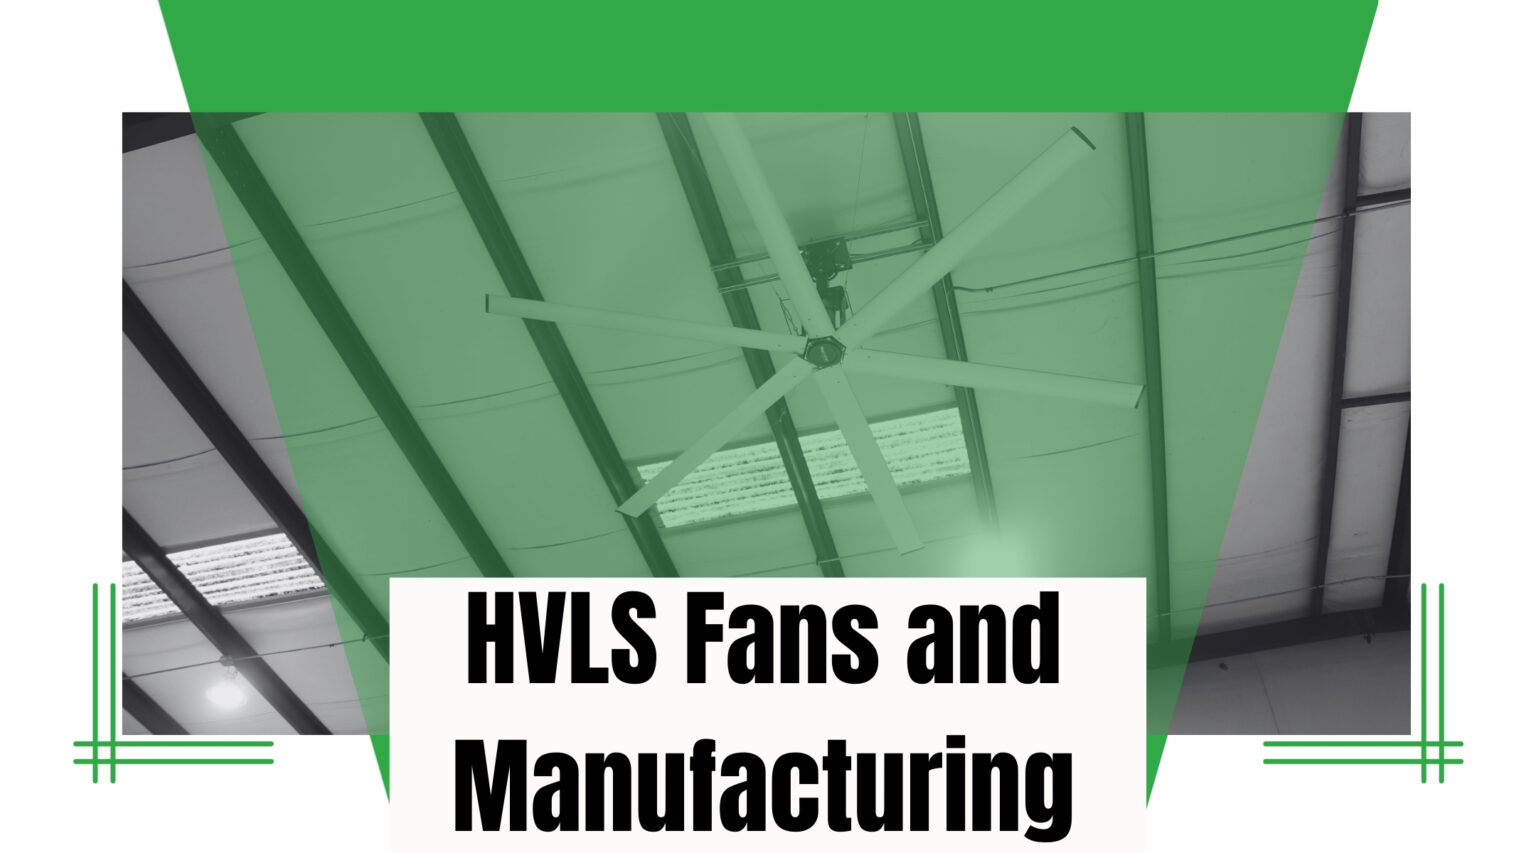 HVLS Fans and Manufacturing